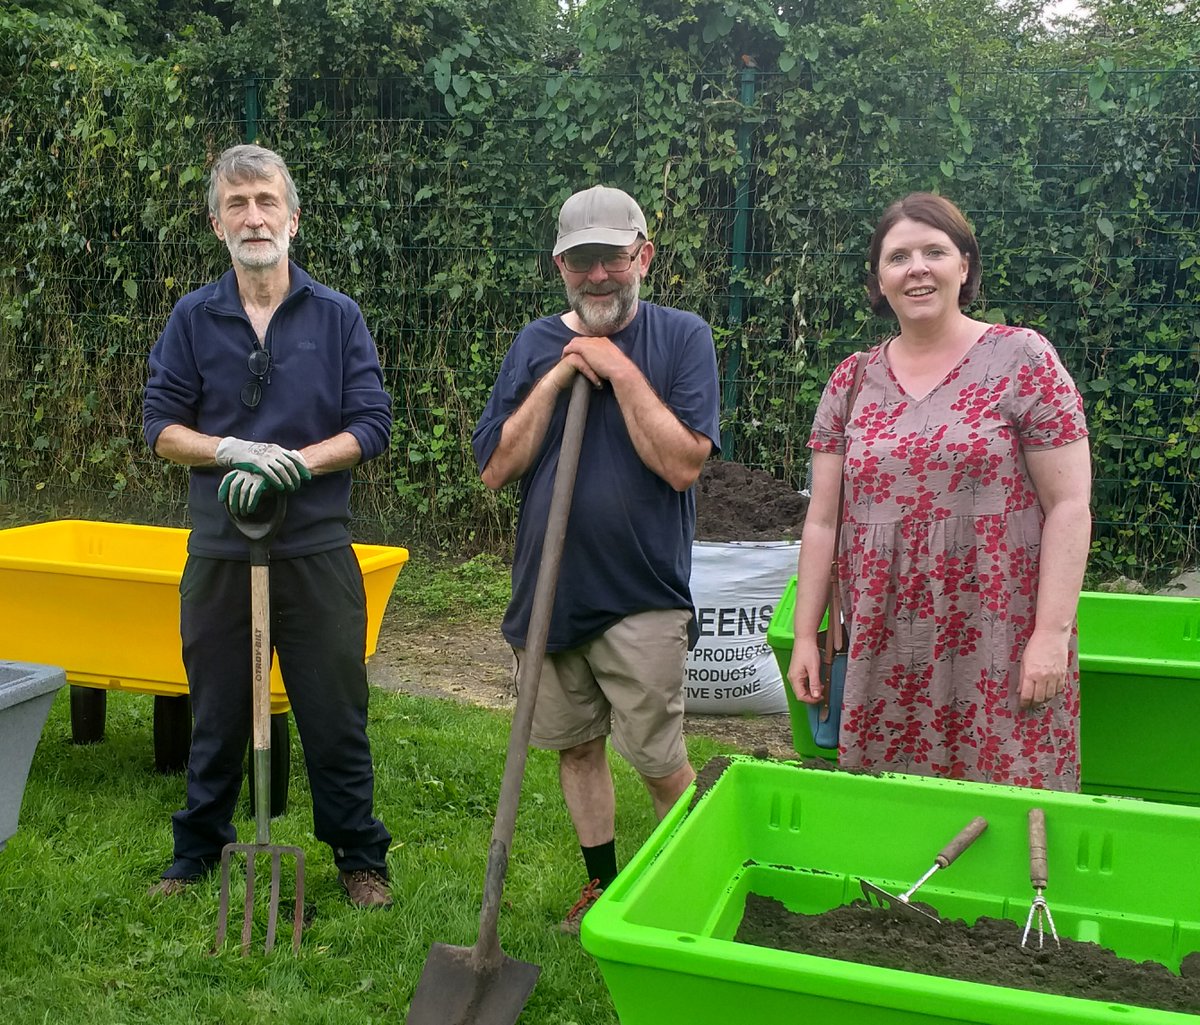 Greening the Grid project. In Canon Breen Park, Clare St. today filling the solar allotments with @communitypower_ @seanohartigan @sineadhrgn 

We’ll be looking for volunteers to get involved  #citizeninnovation #positiveenergychampions #limerick